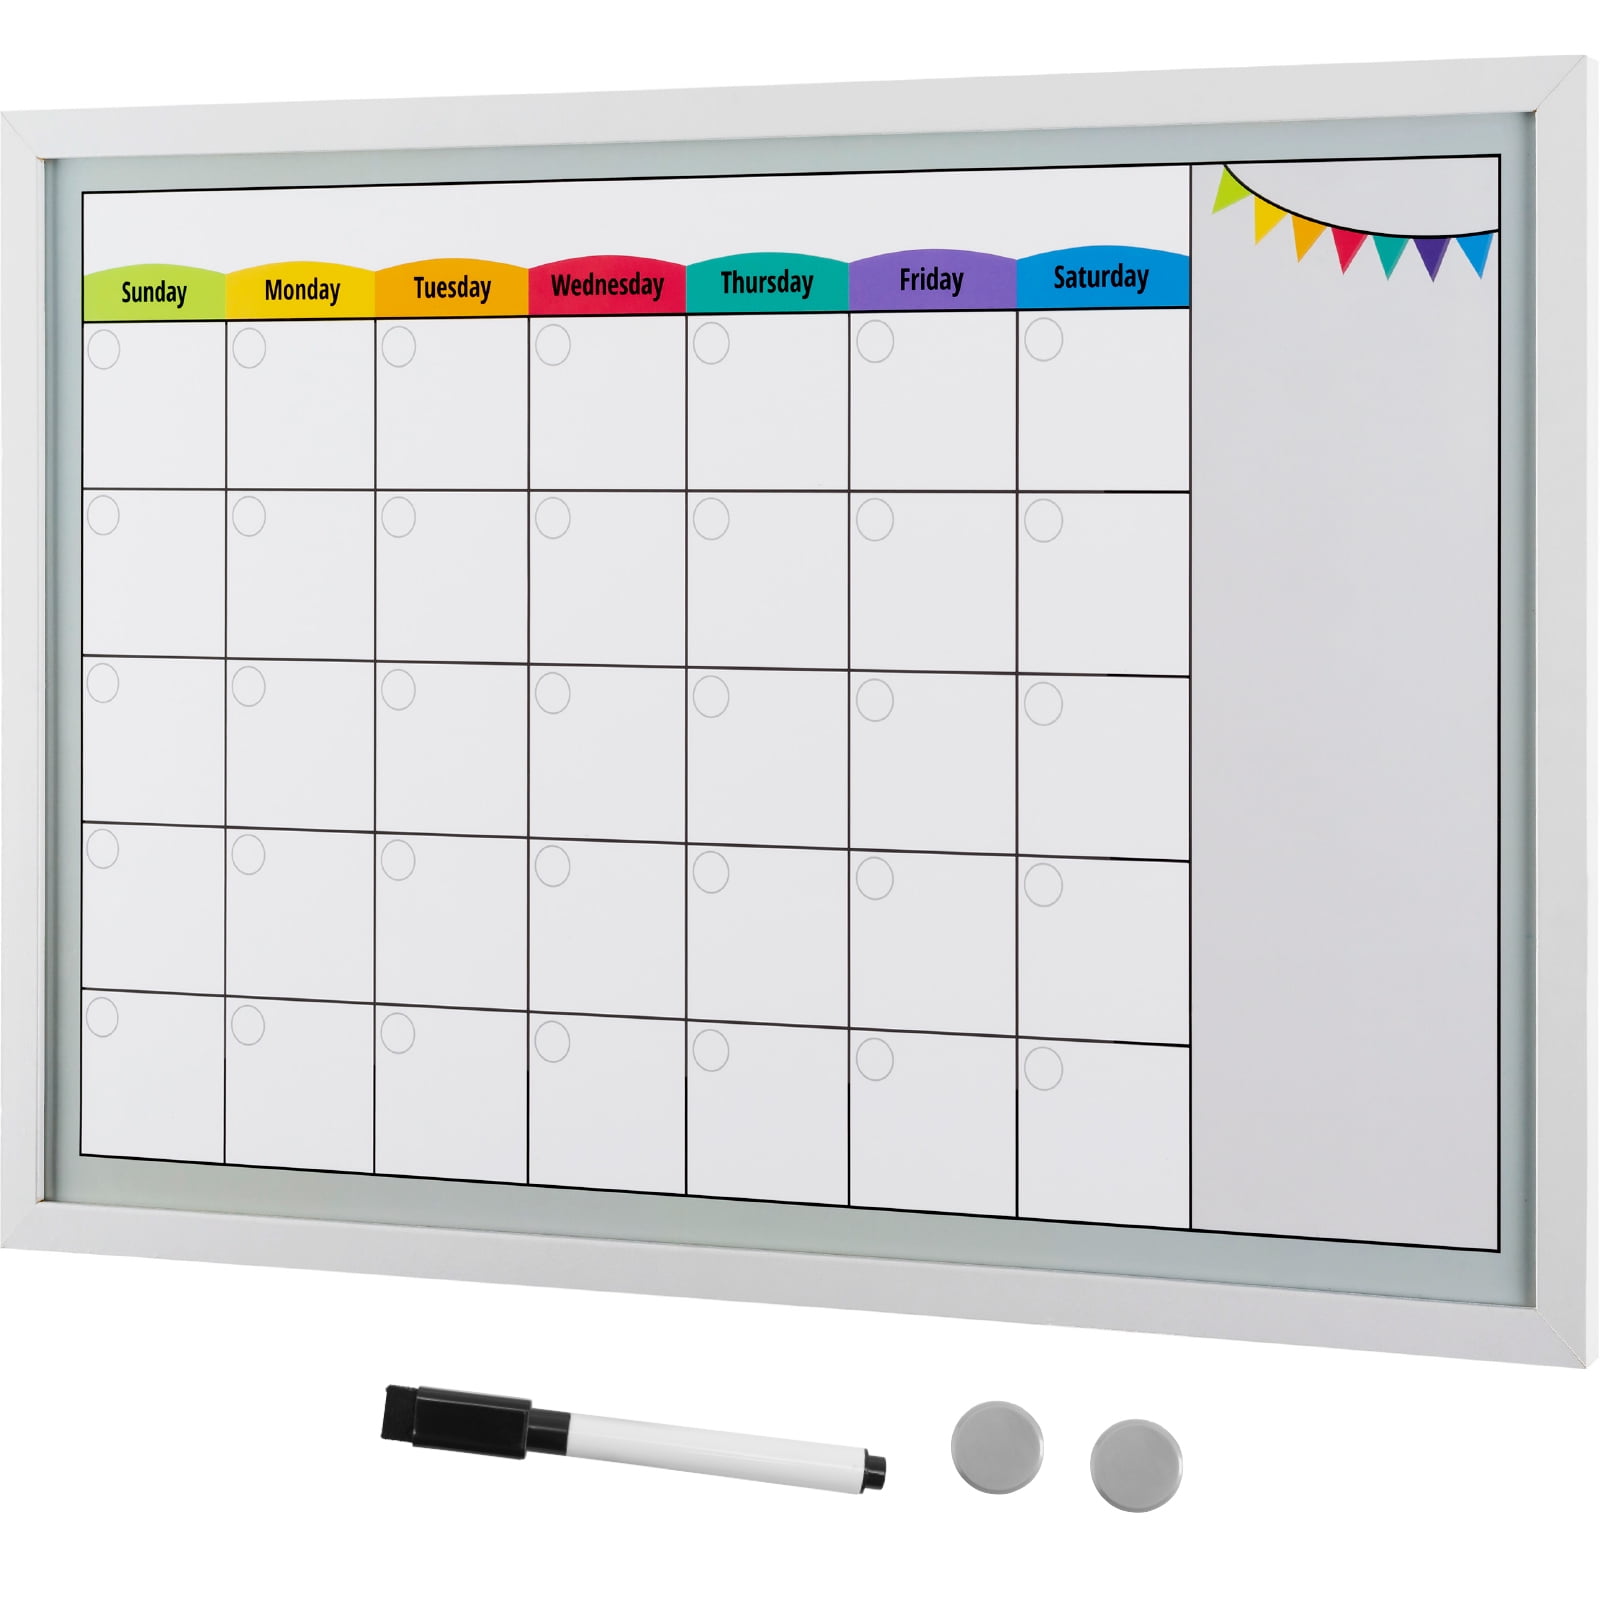 excello-global-products-framed-magnetic-calendar-whiteboard-24x16-with